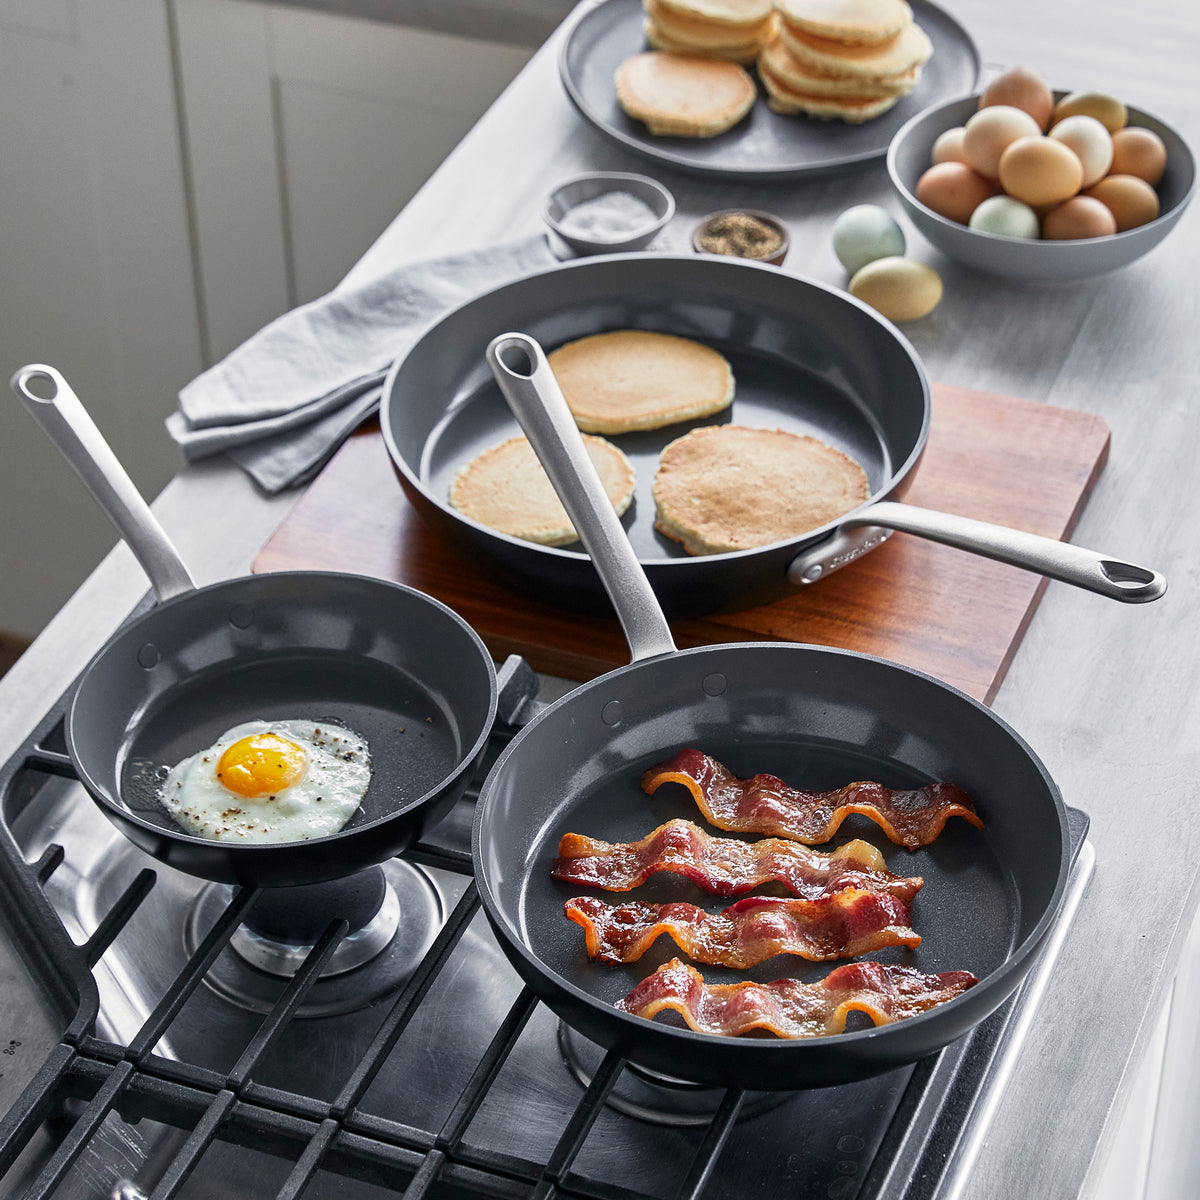 Frying Pans & Skillets - Non-Stick, Cast Iron & More - IKEA